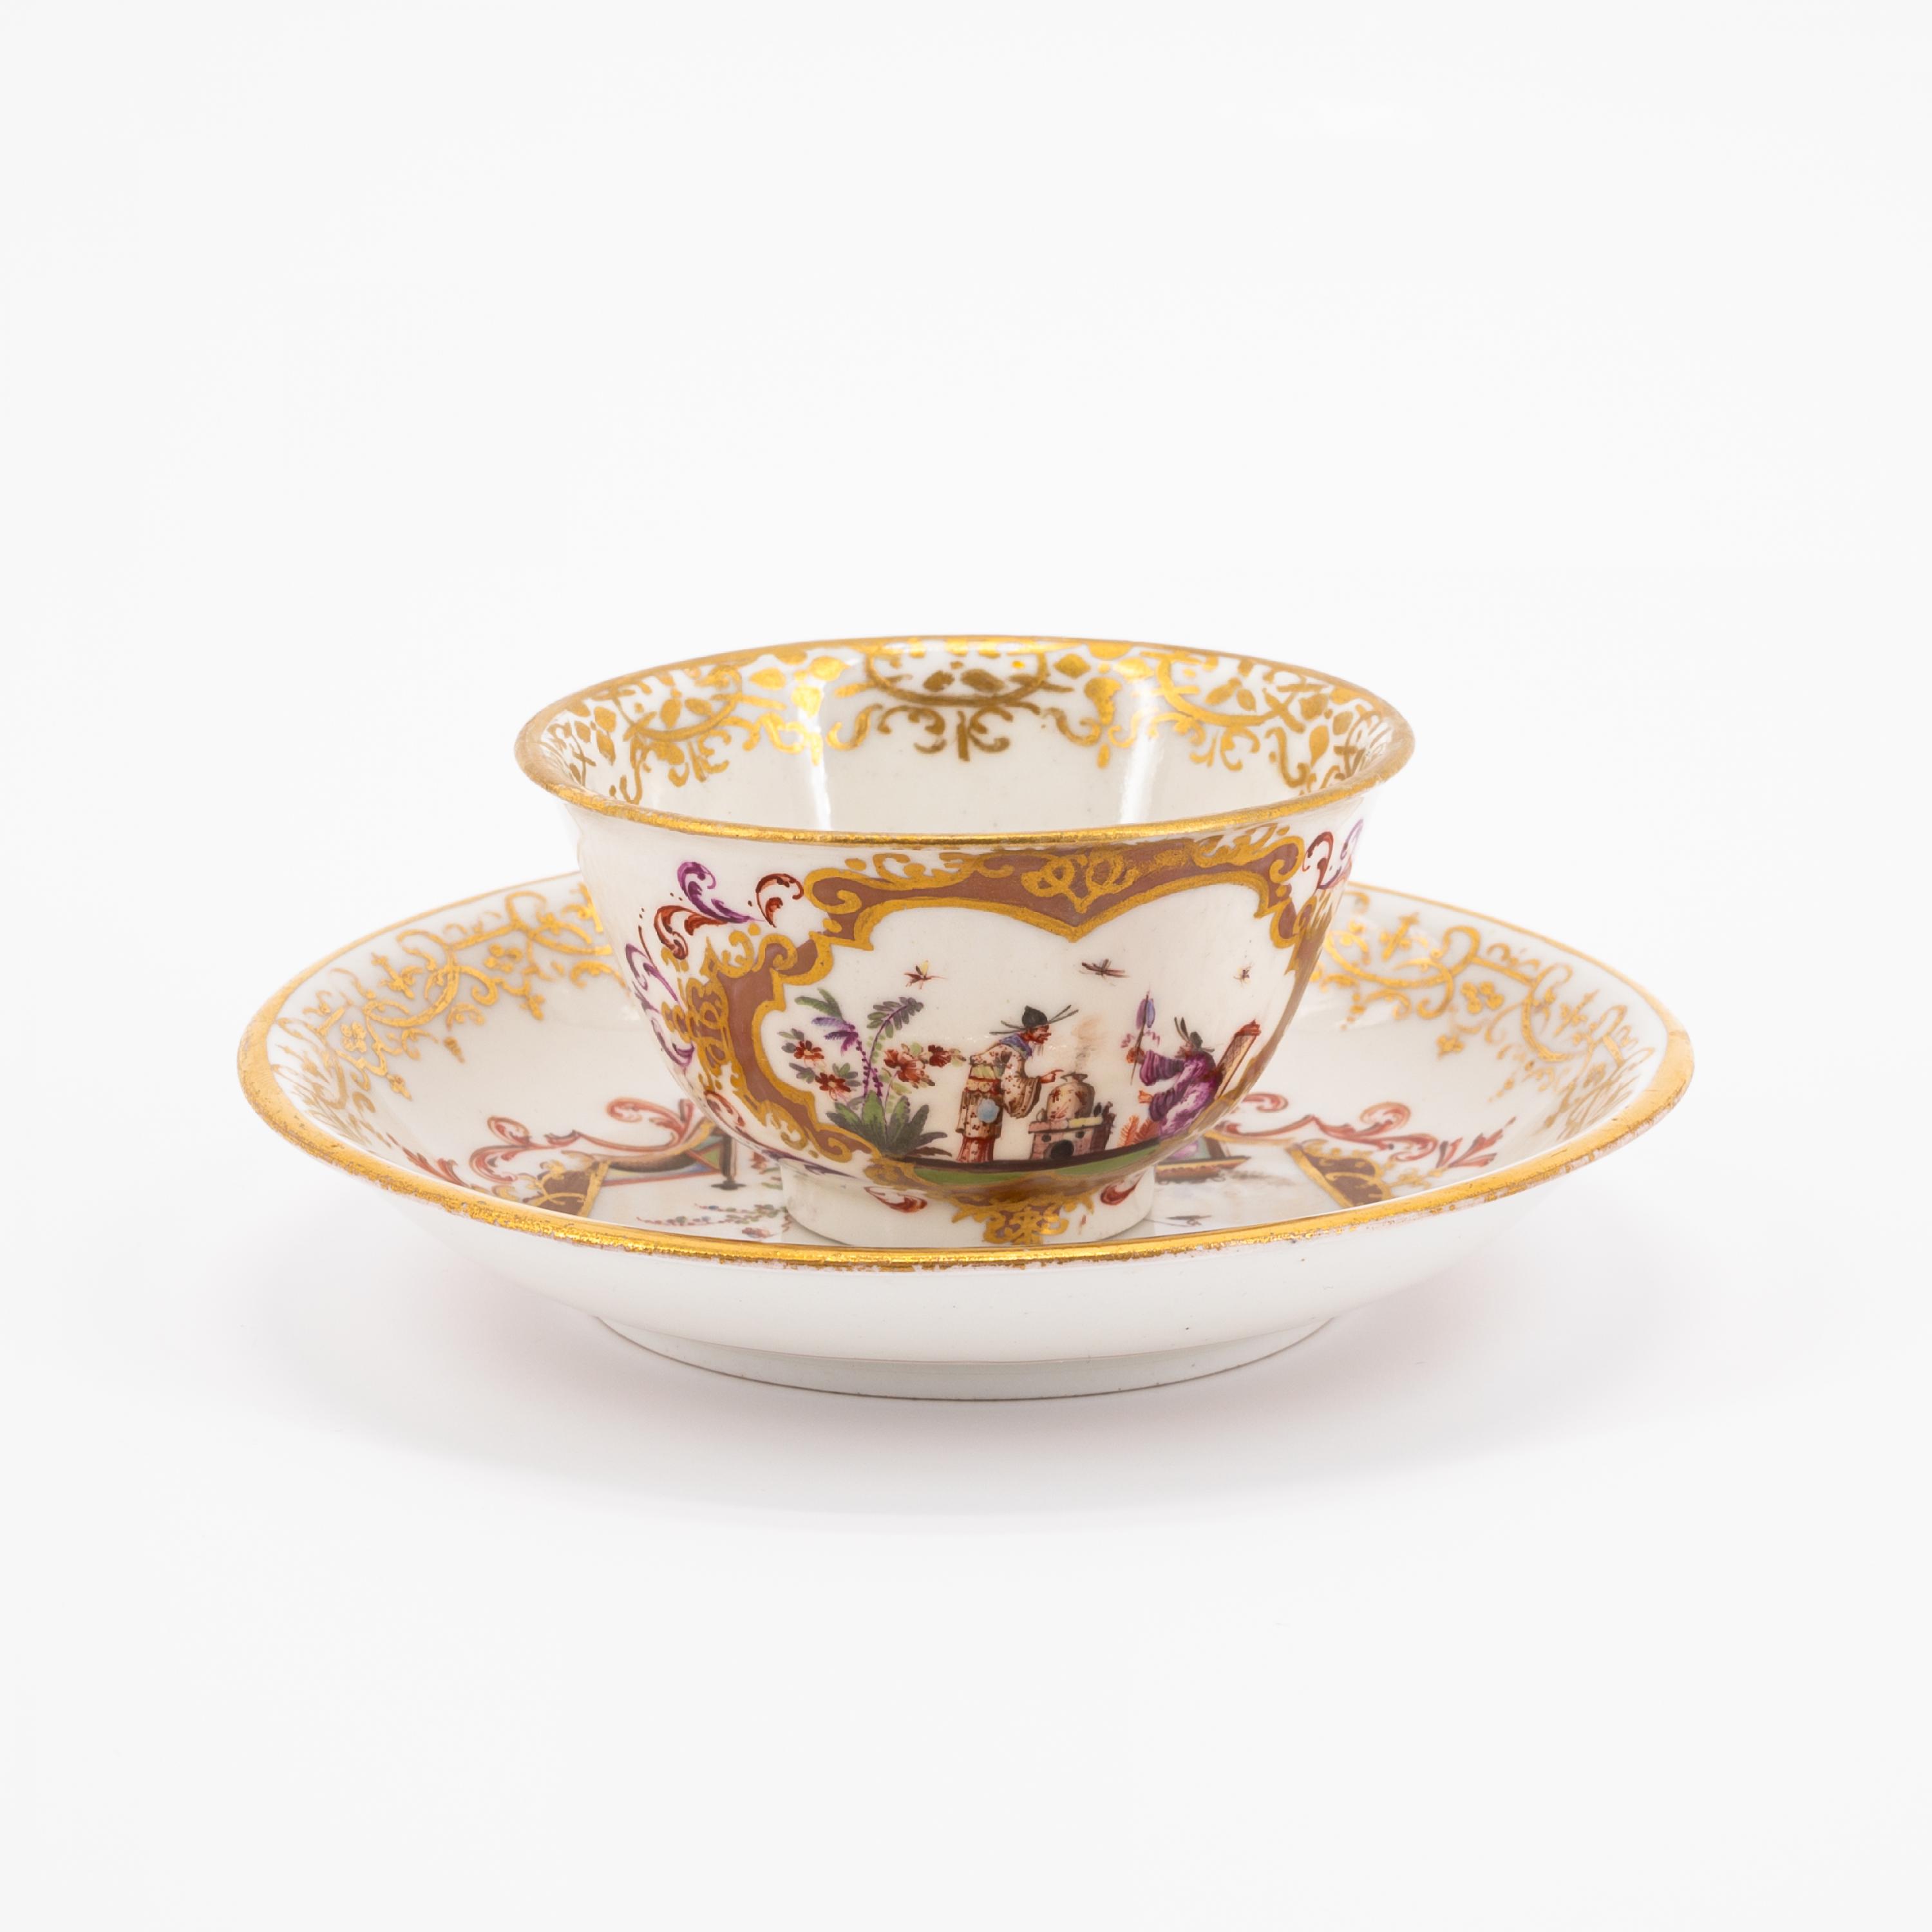 TWO PORCELAIN TEA BOWLS WITH SAUERES AND CHINOISERIES - Image 3 of 11